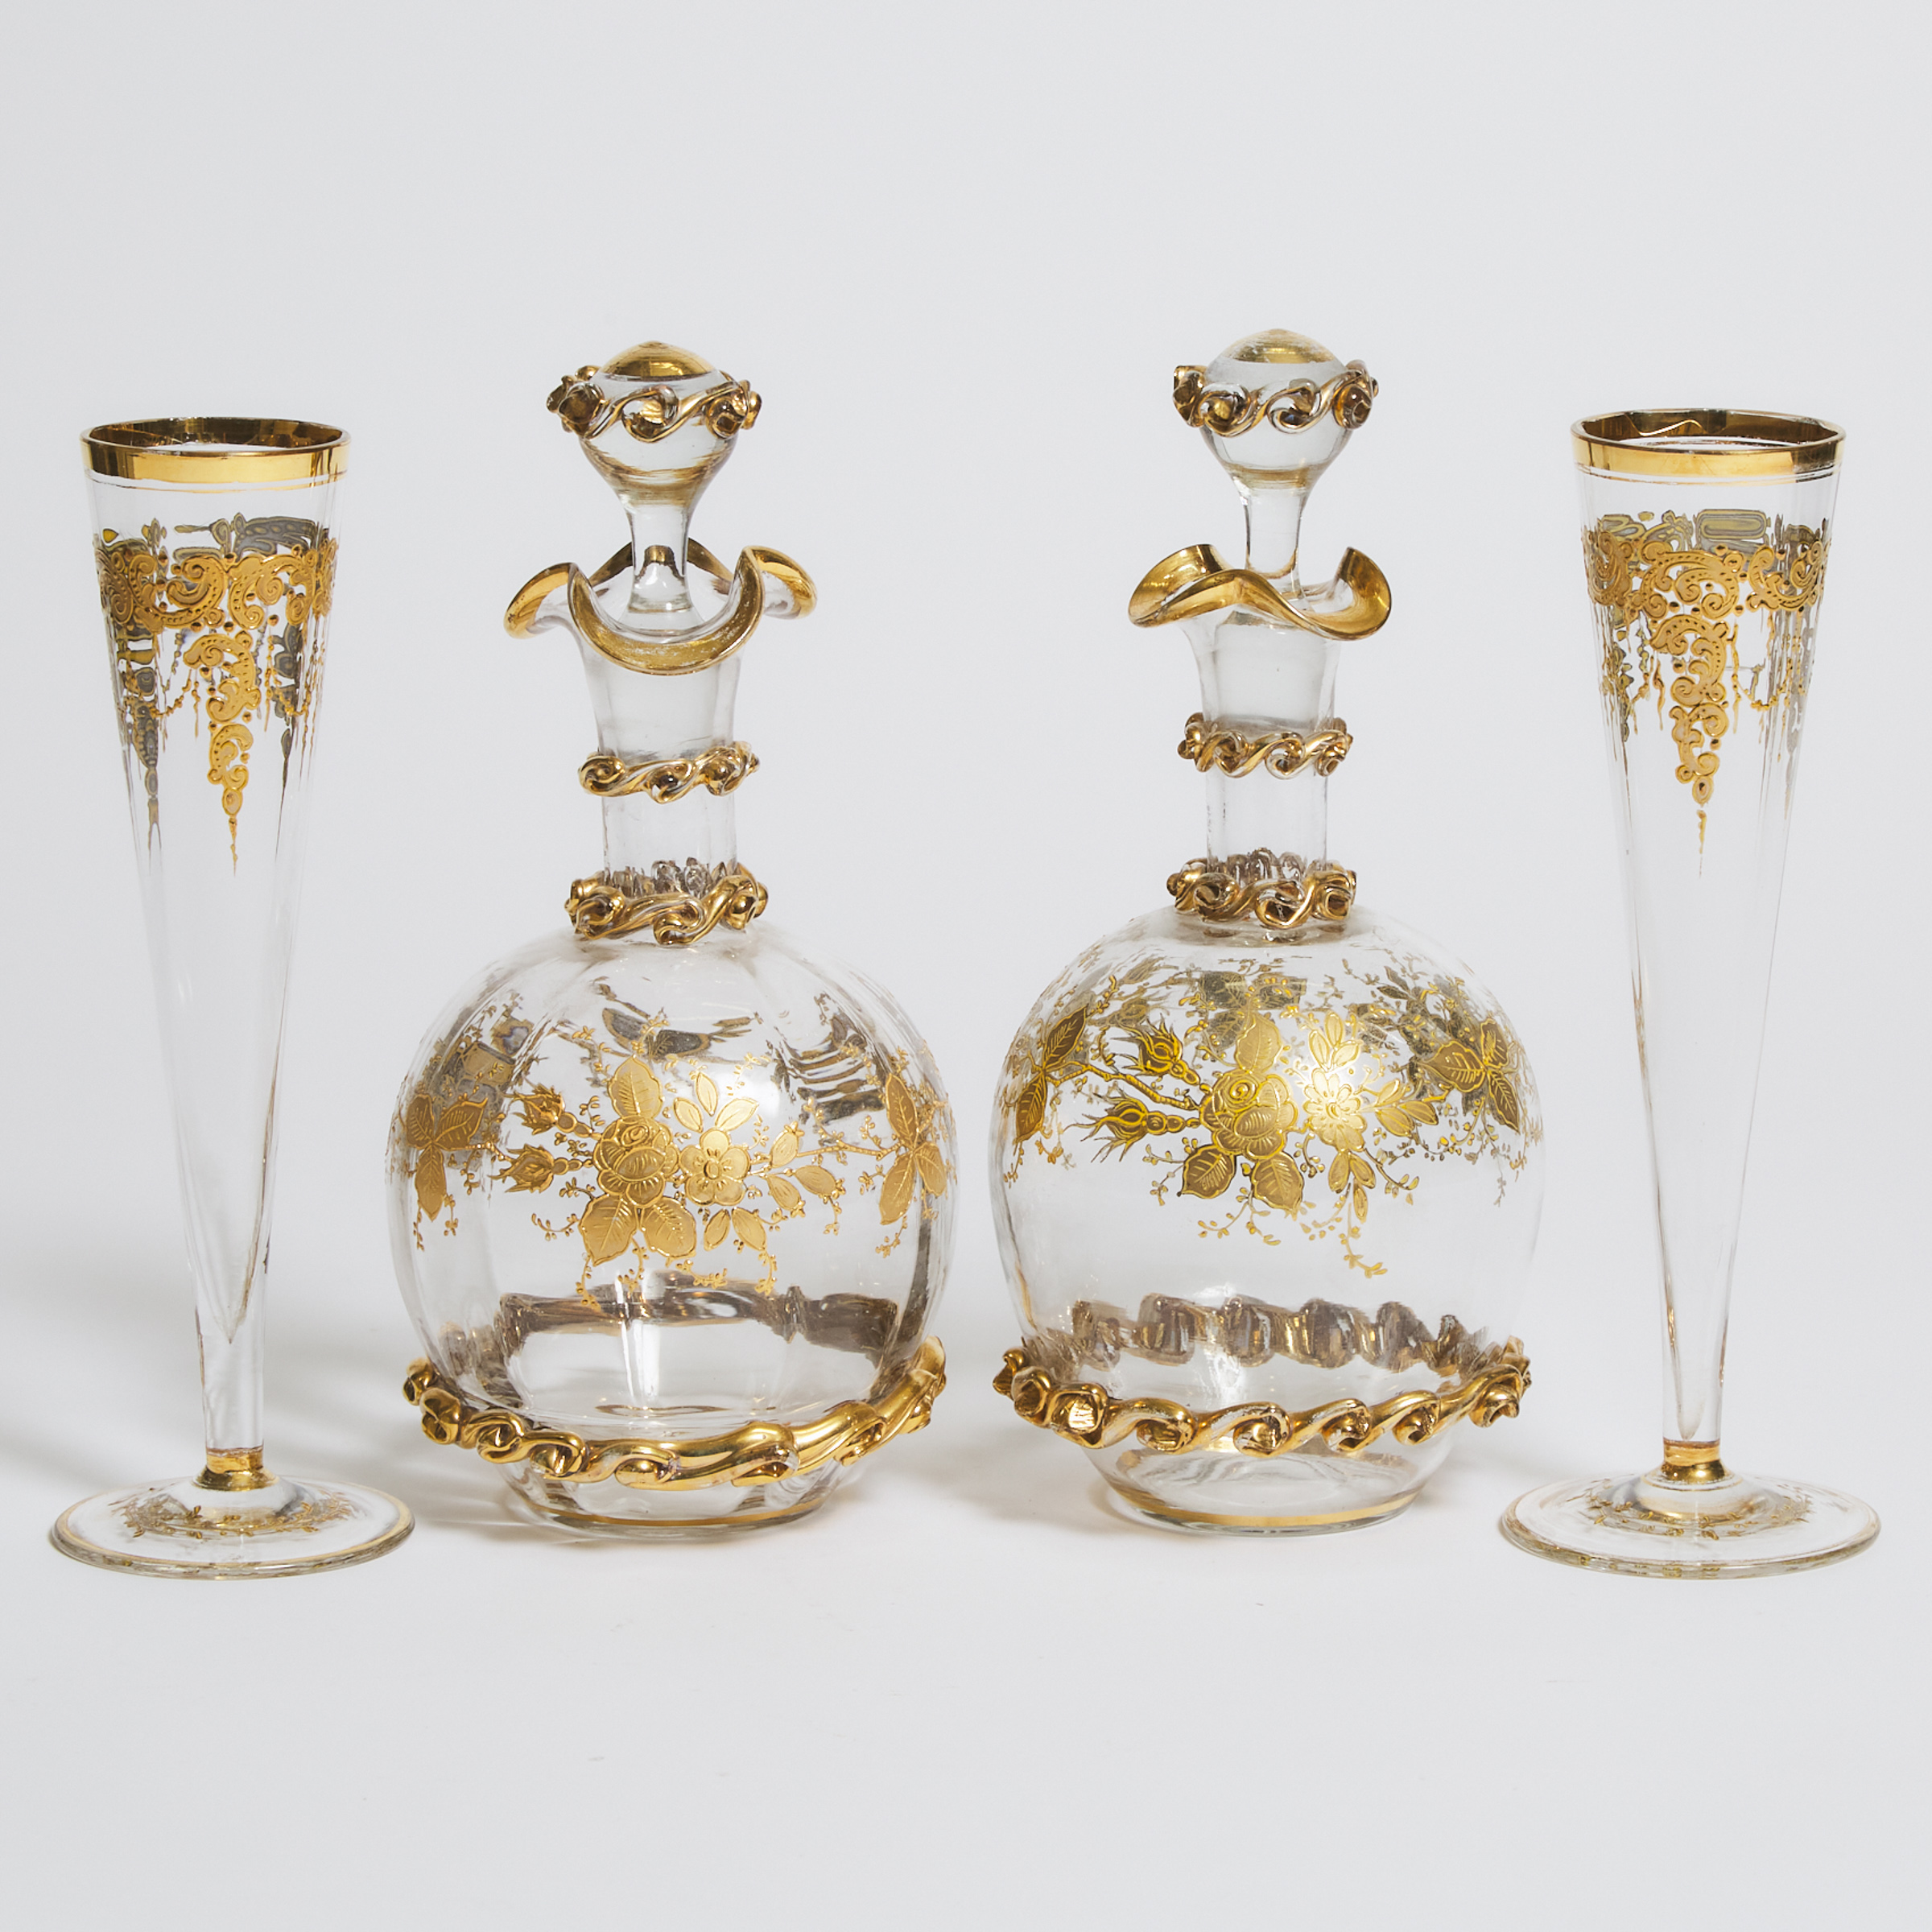 Pair of Continental Gilt Glass Decanters and Champagne Flutes, 20th century